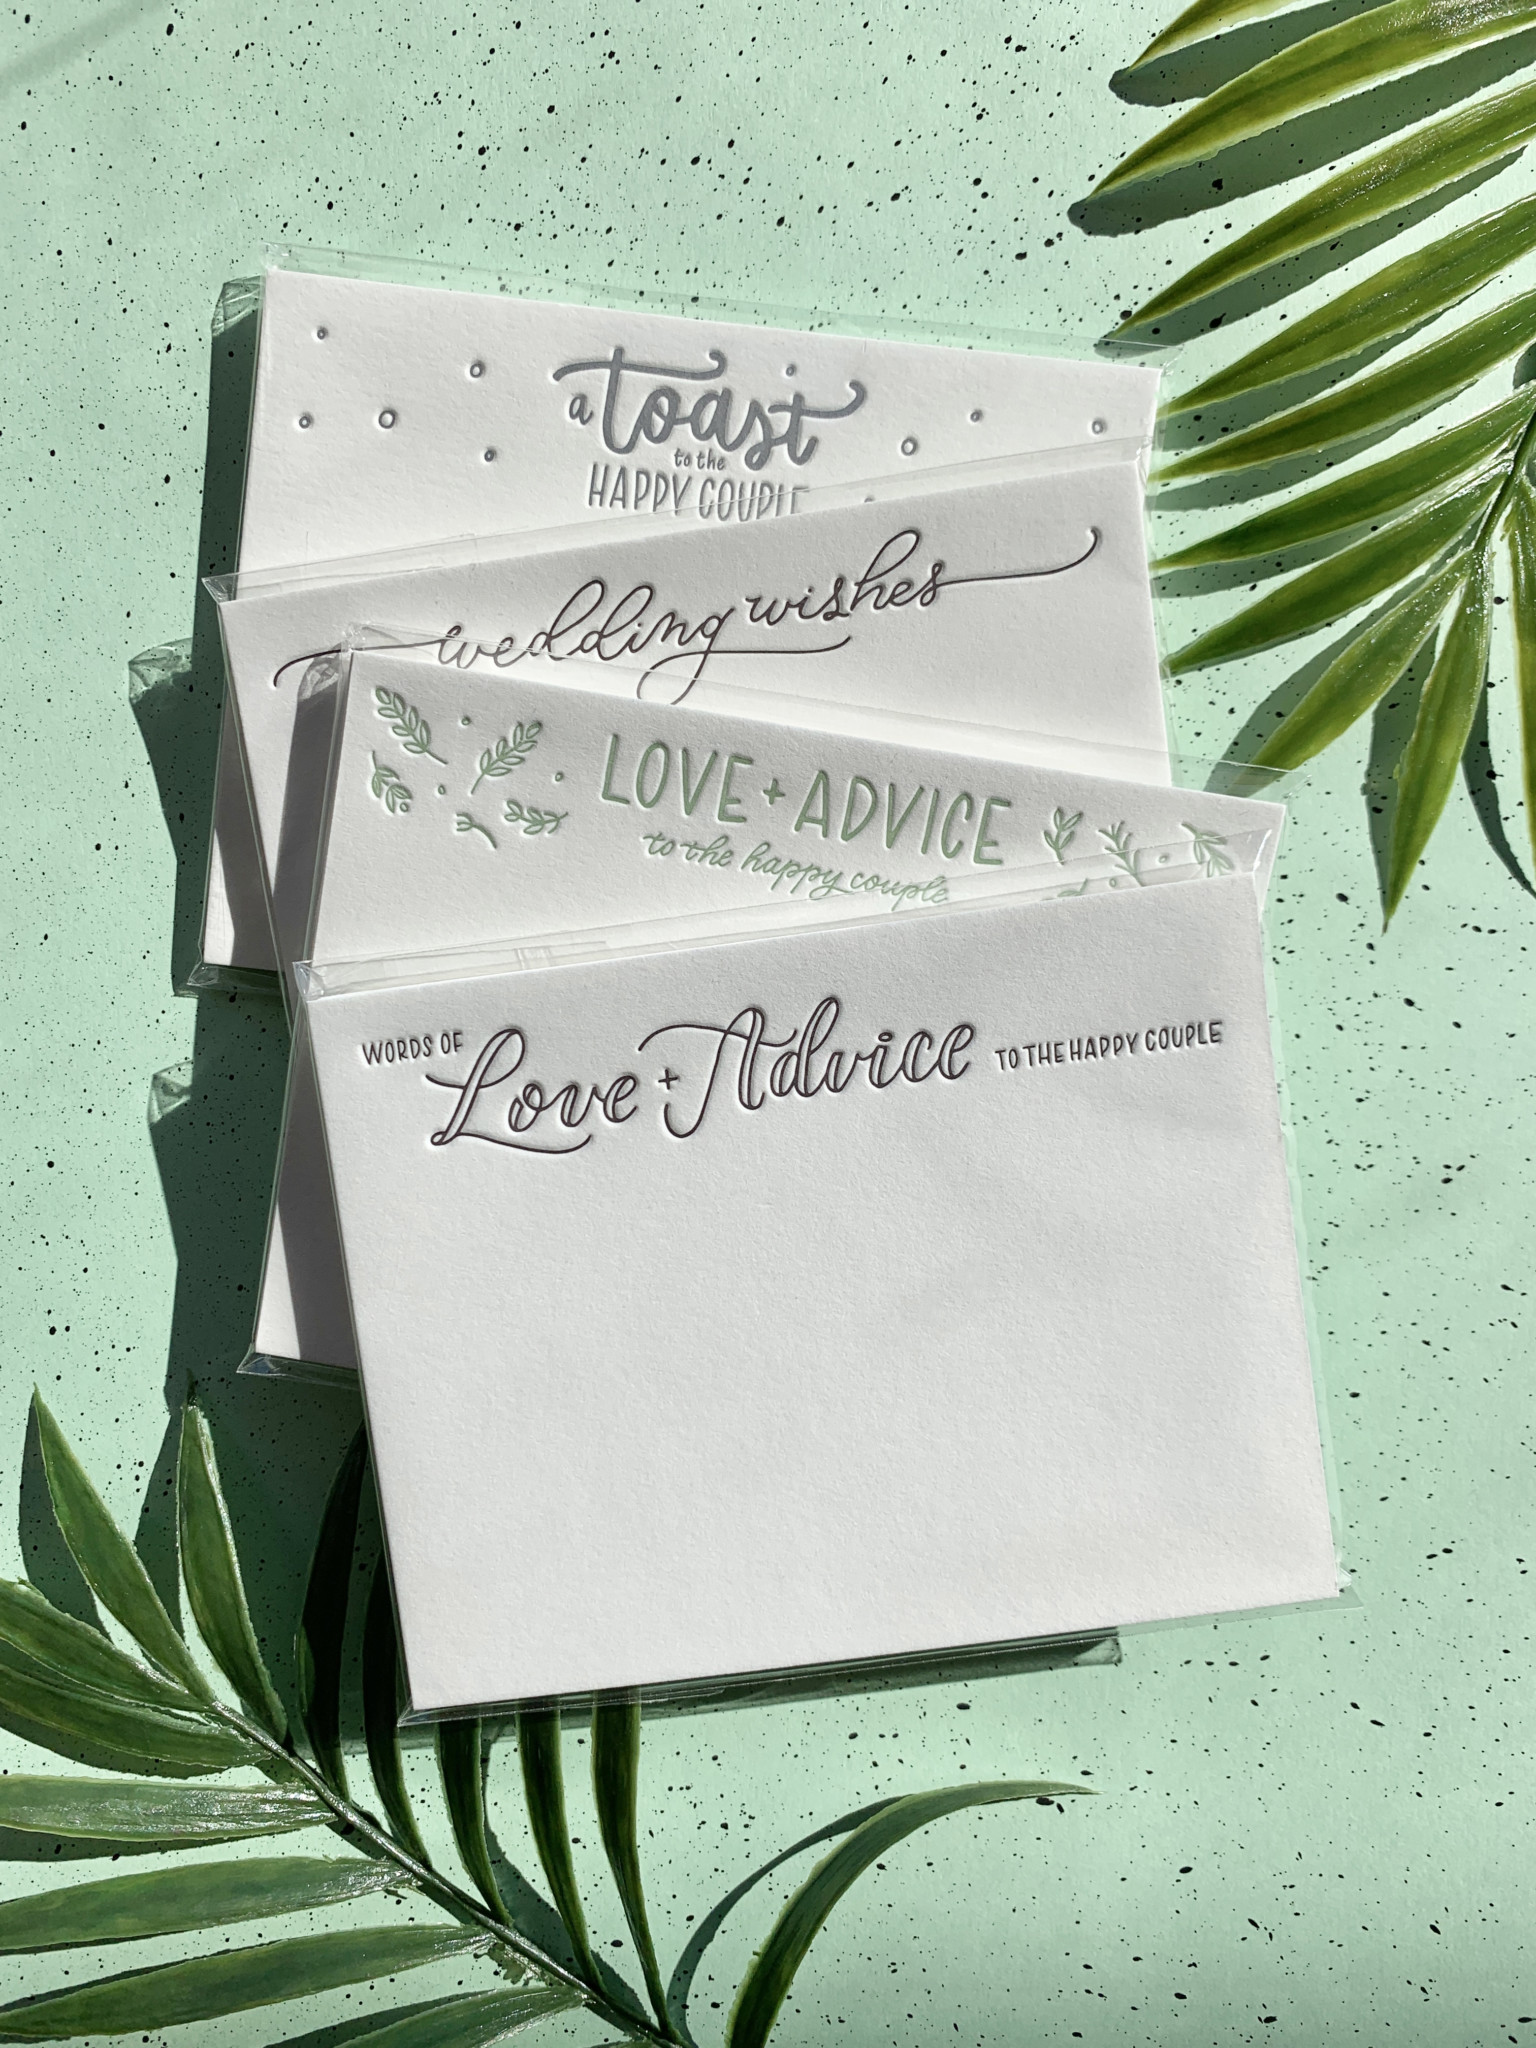 Soft packs of letterpress printed wedding advice cards arranged on a green paper background with palm leaf accents.